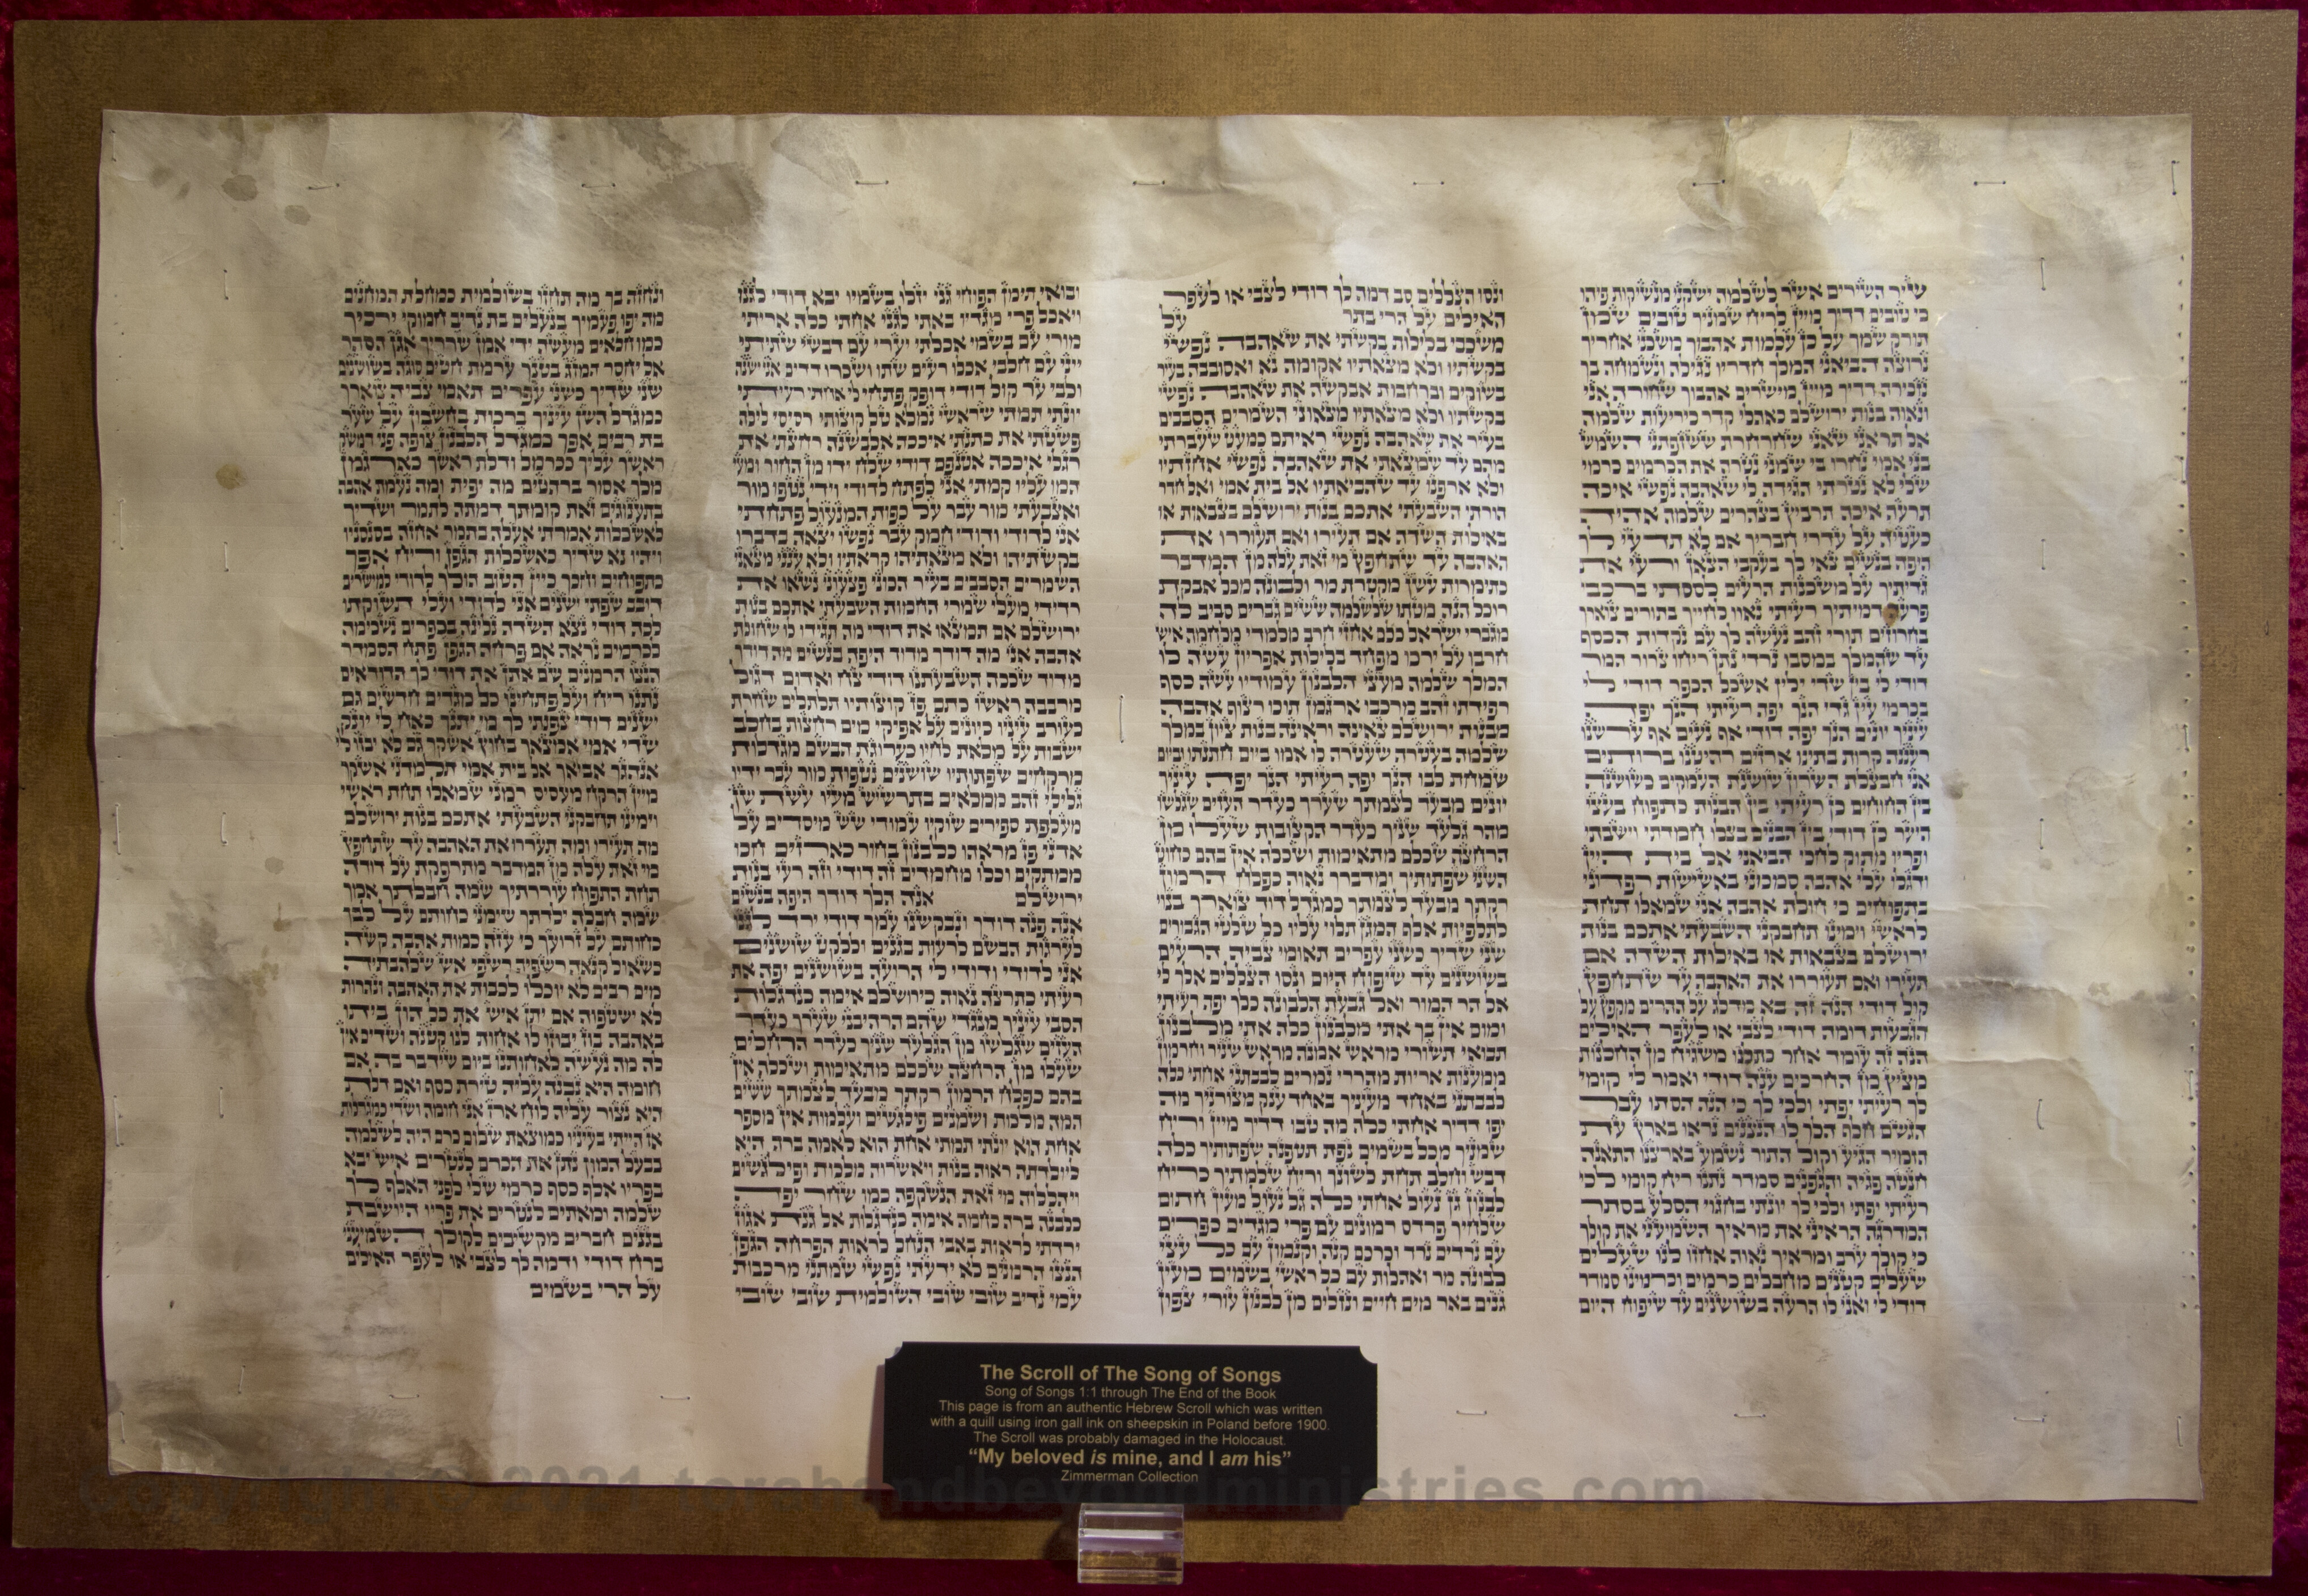 Hebrew Scroll of the Song of Songs written in Poland before 1900